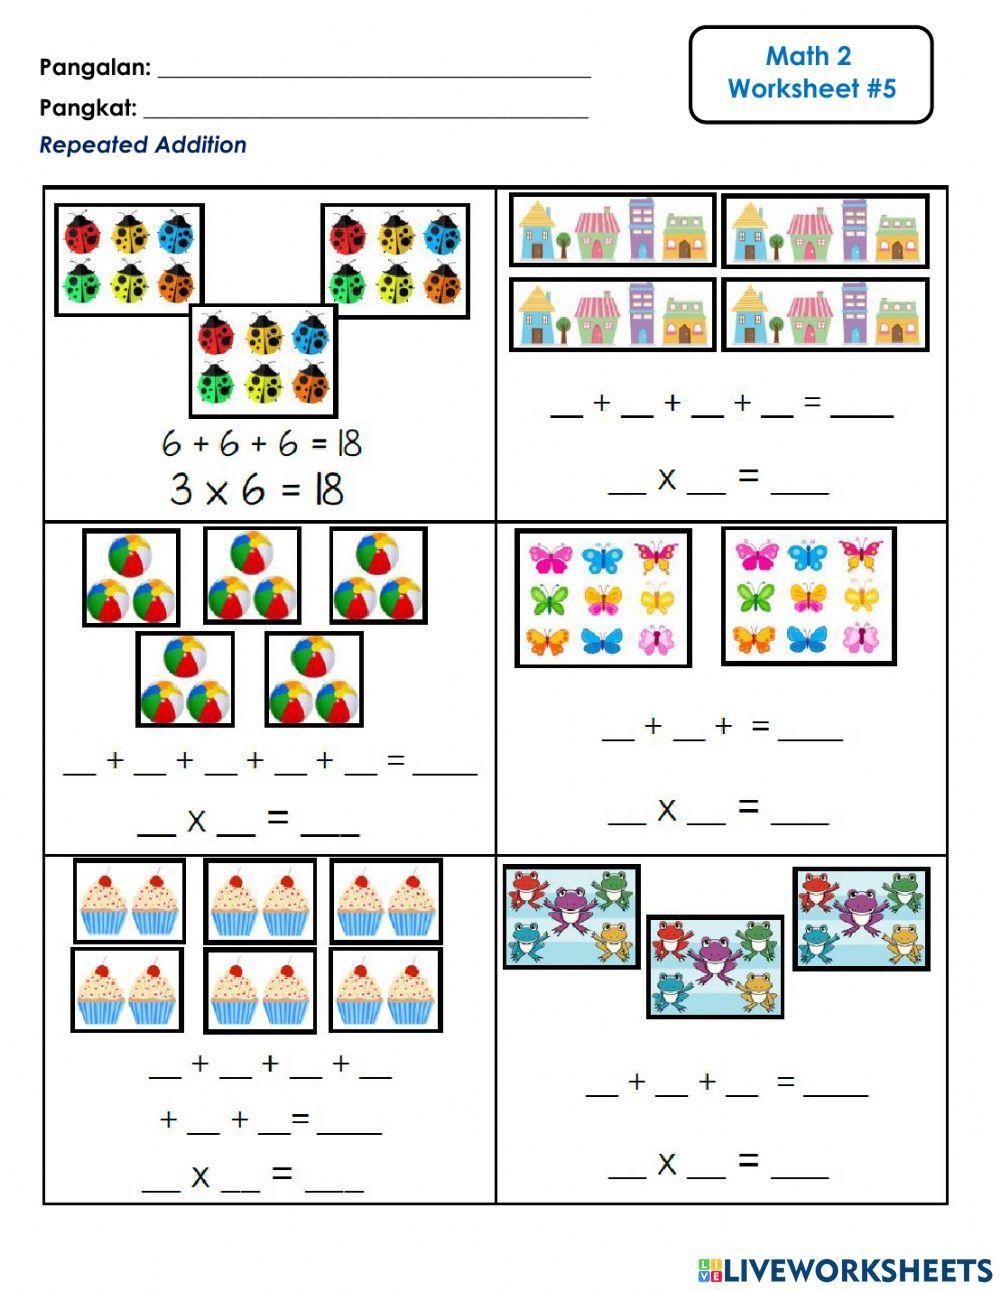 Math Worksheet -5 - Repeated Addition